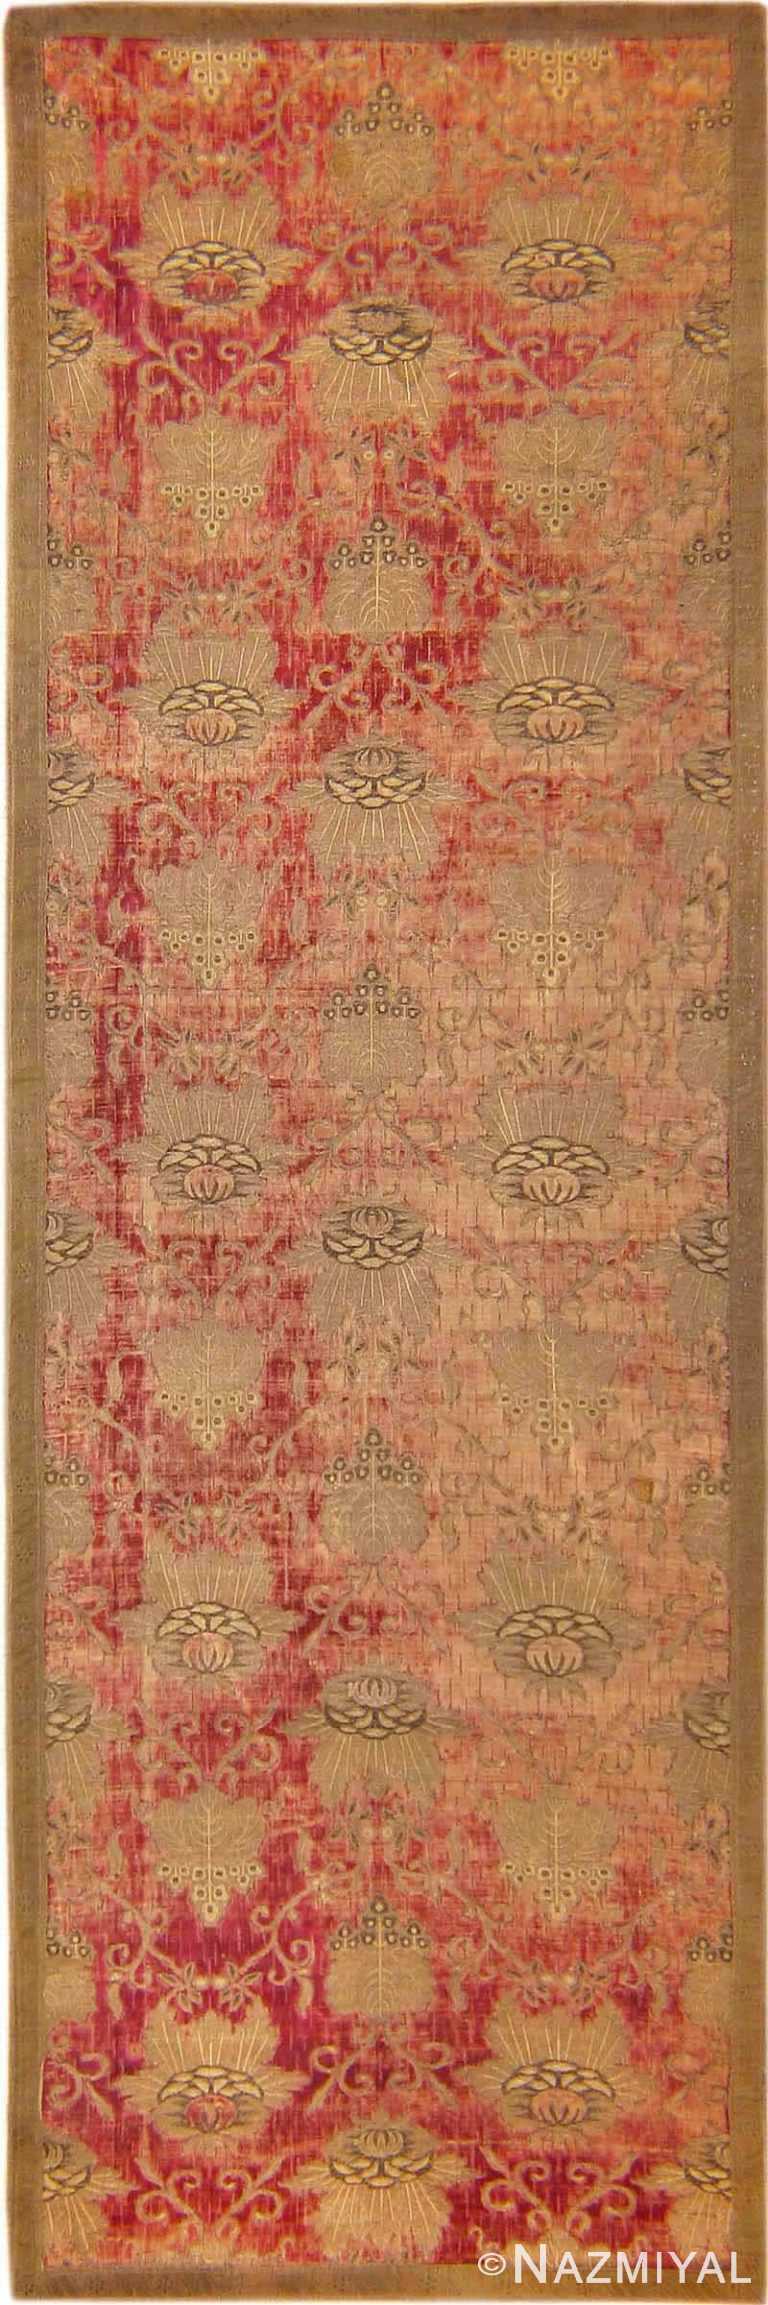 Antique Velvet Italian Textile #41961 by Nazmiyal Antique Rugs